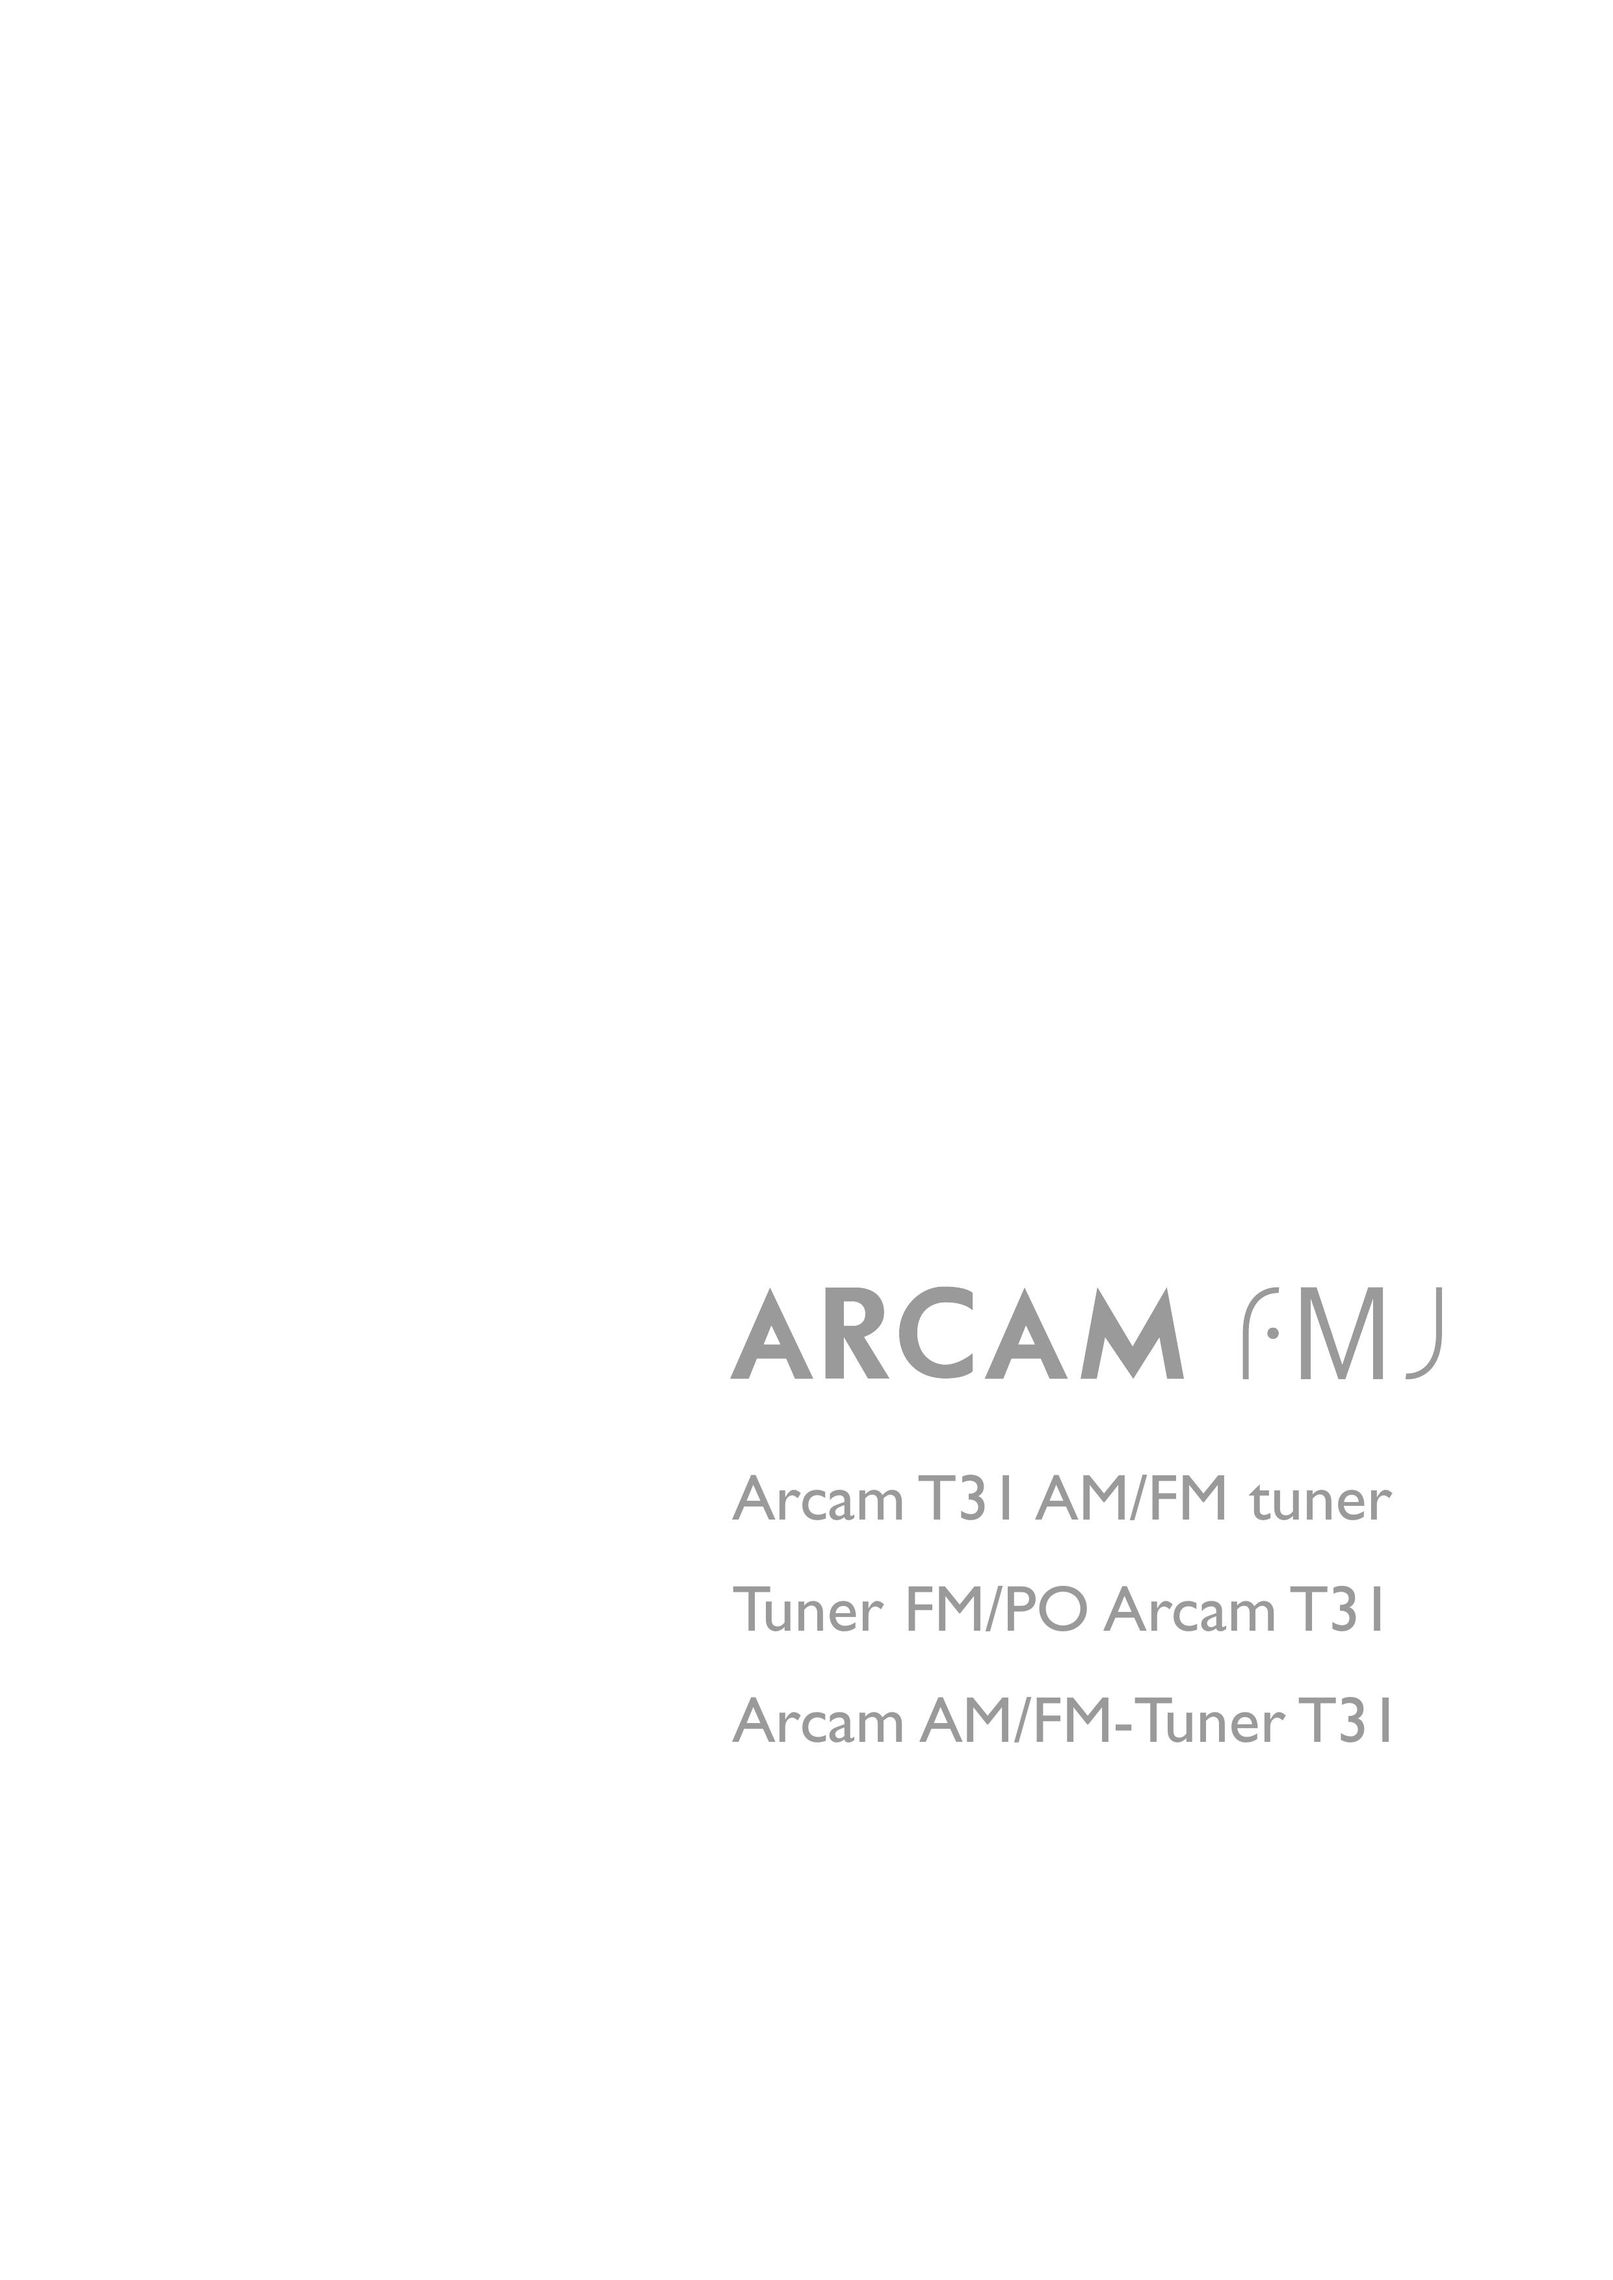 Arcam T31 Car Stereo System User Manual (Page 1)